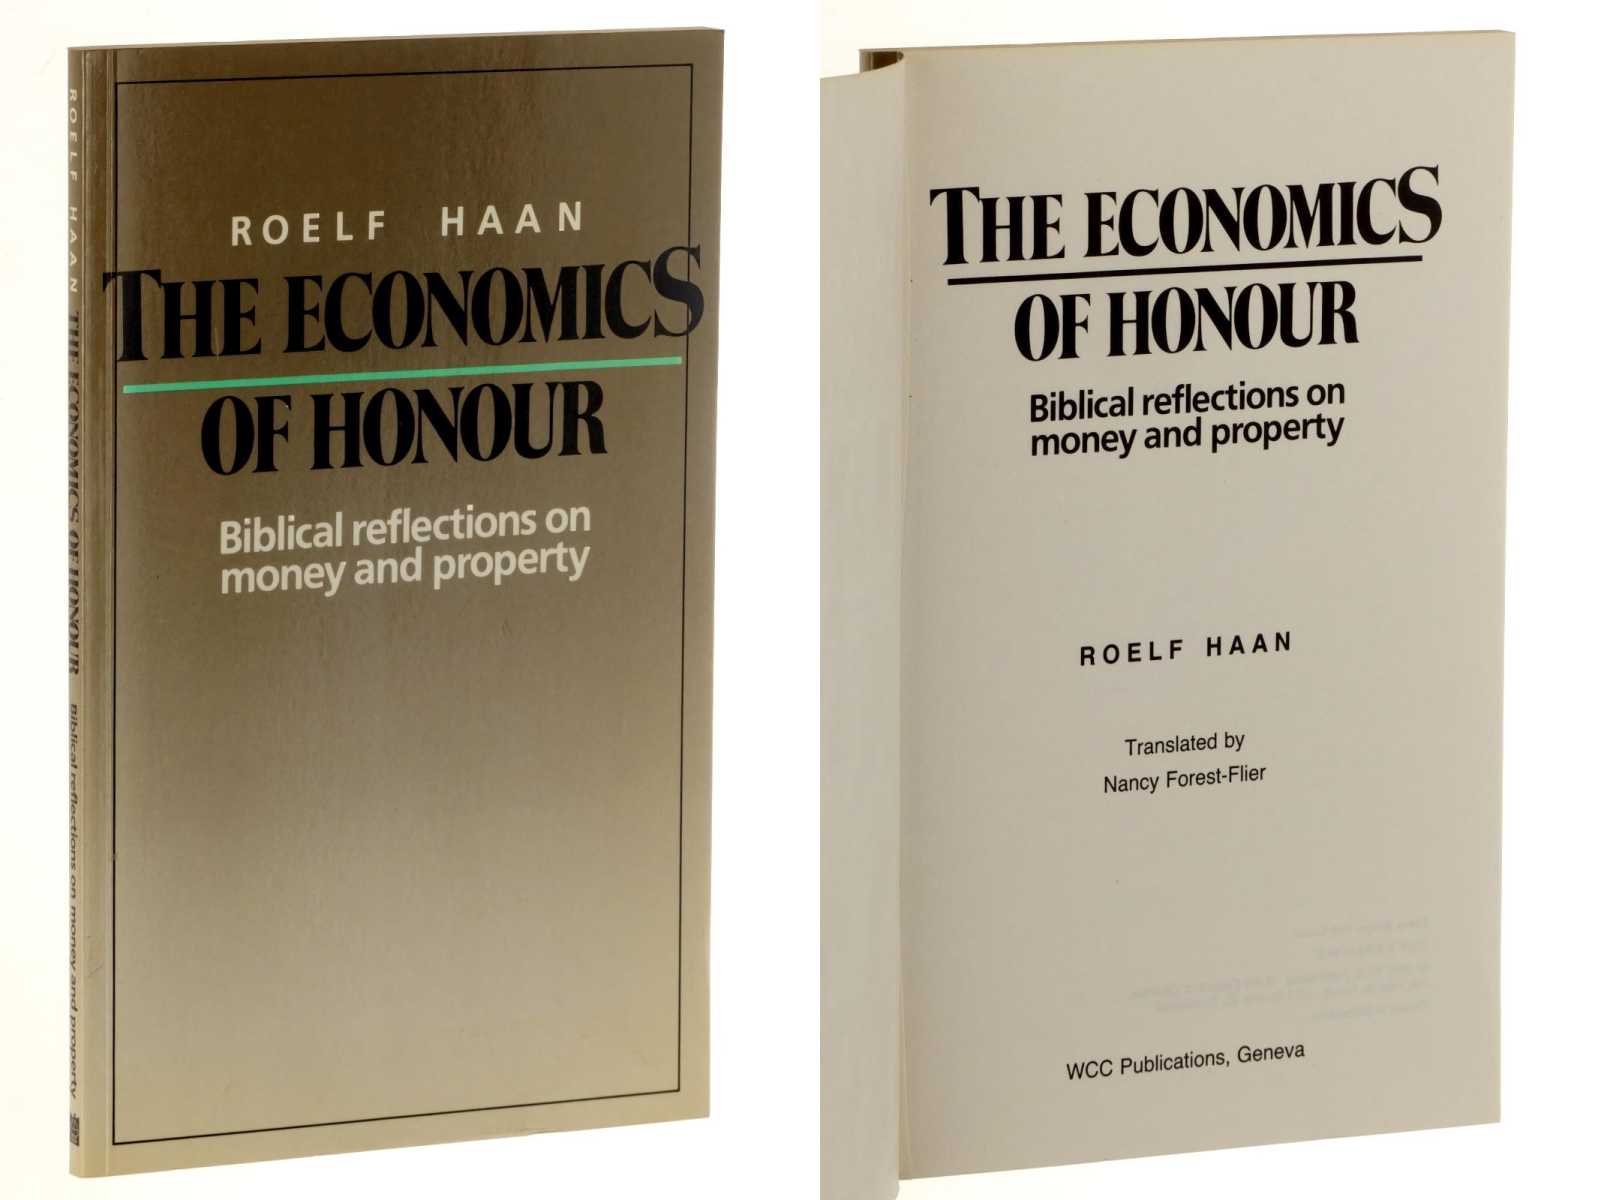 Haan, Roelf L.:  The economics of honour. Biblical reflections on money and property. Translated by Nancy Forst-Flier. 